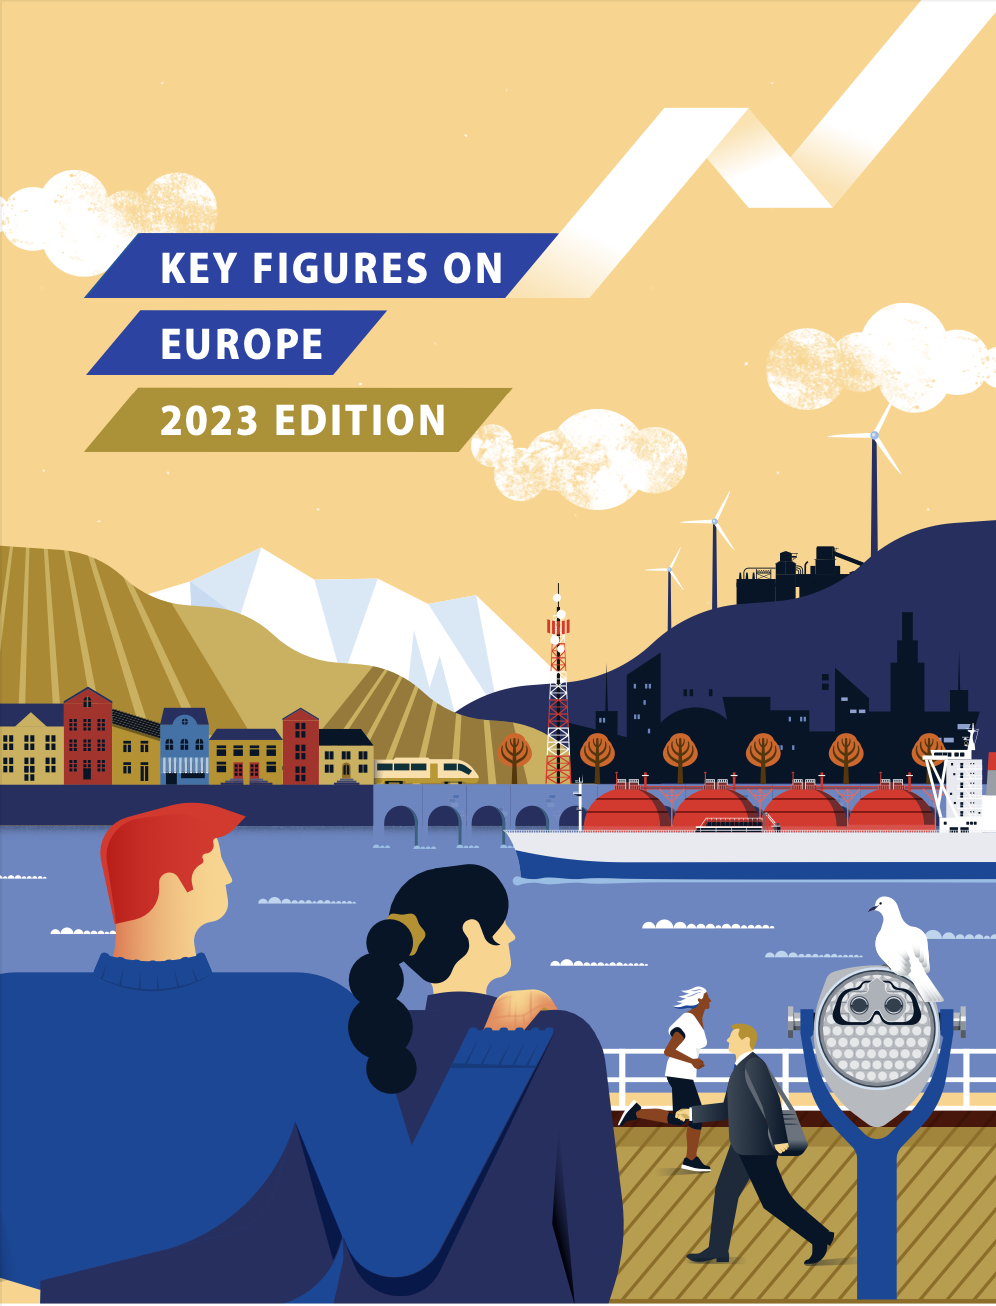 Screenshot of the cover of the publication "Key figures on Europe - 2023 edition"